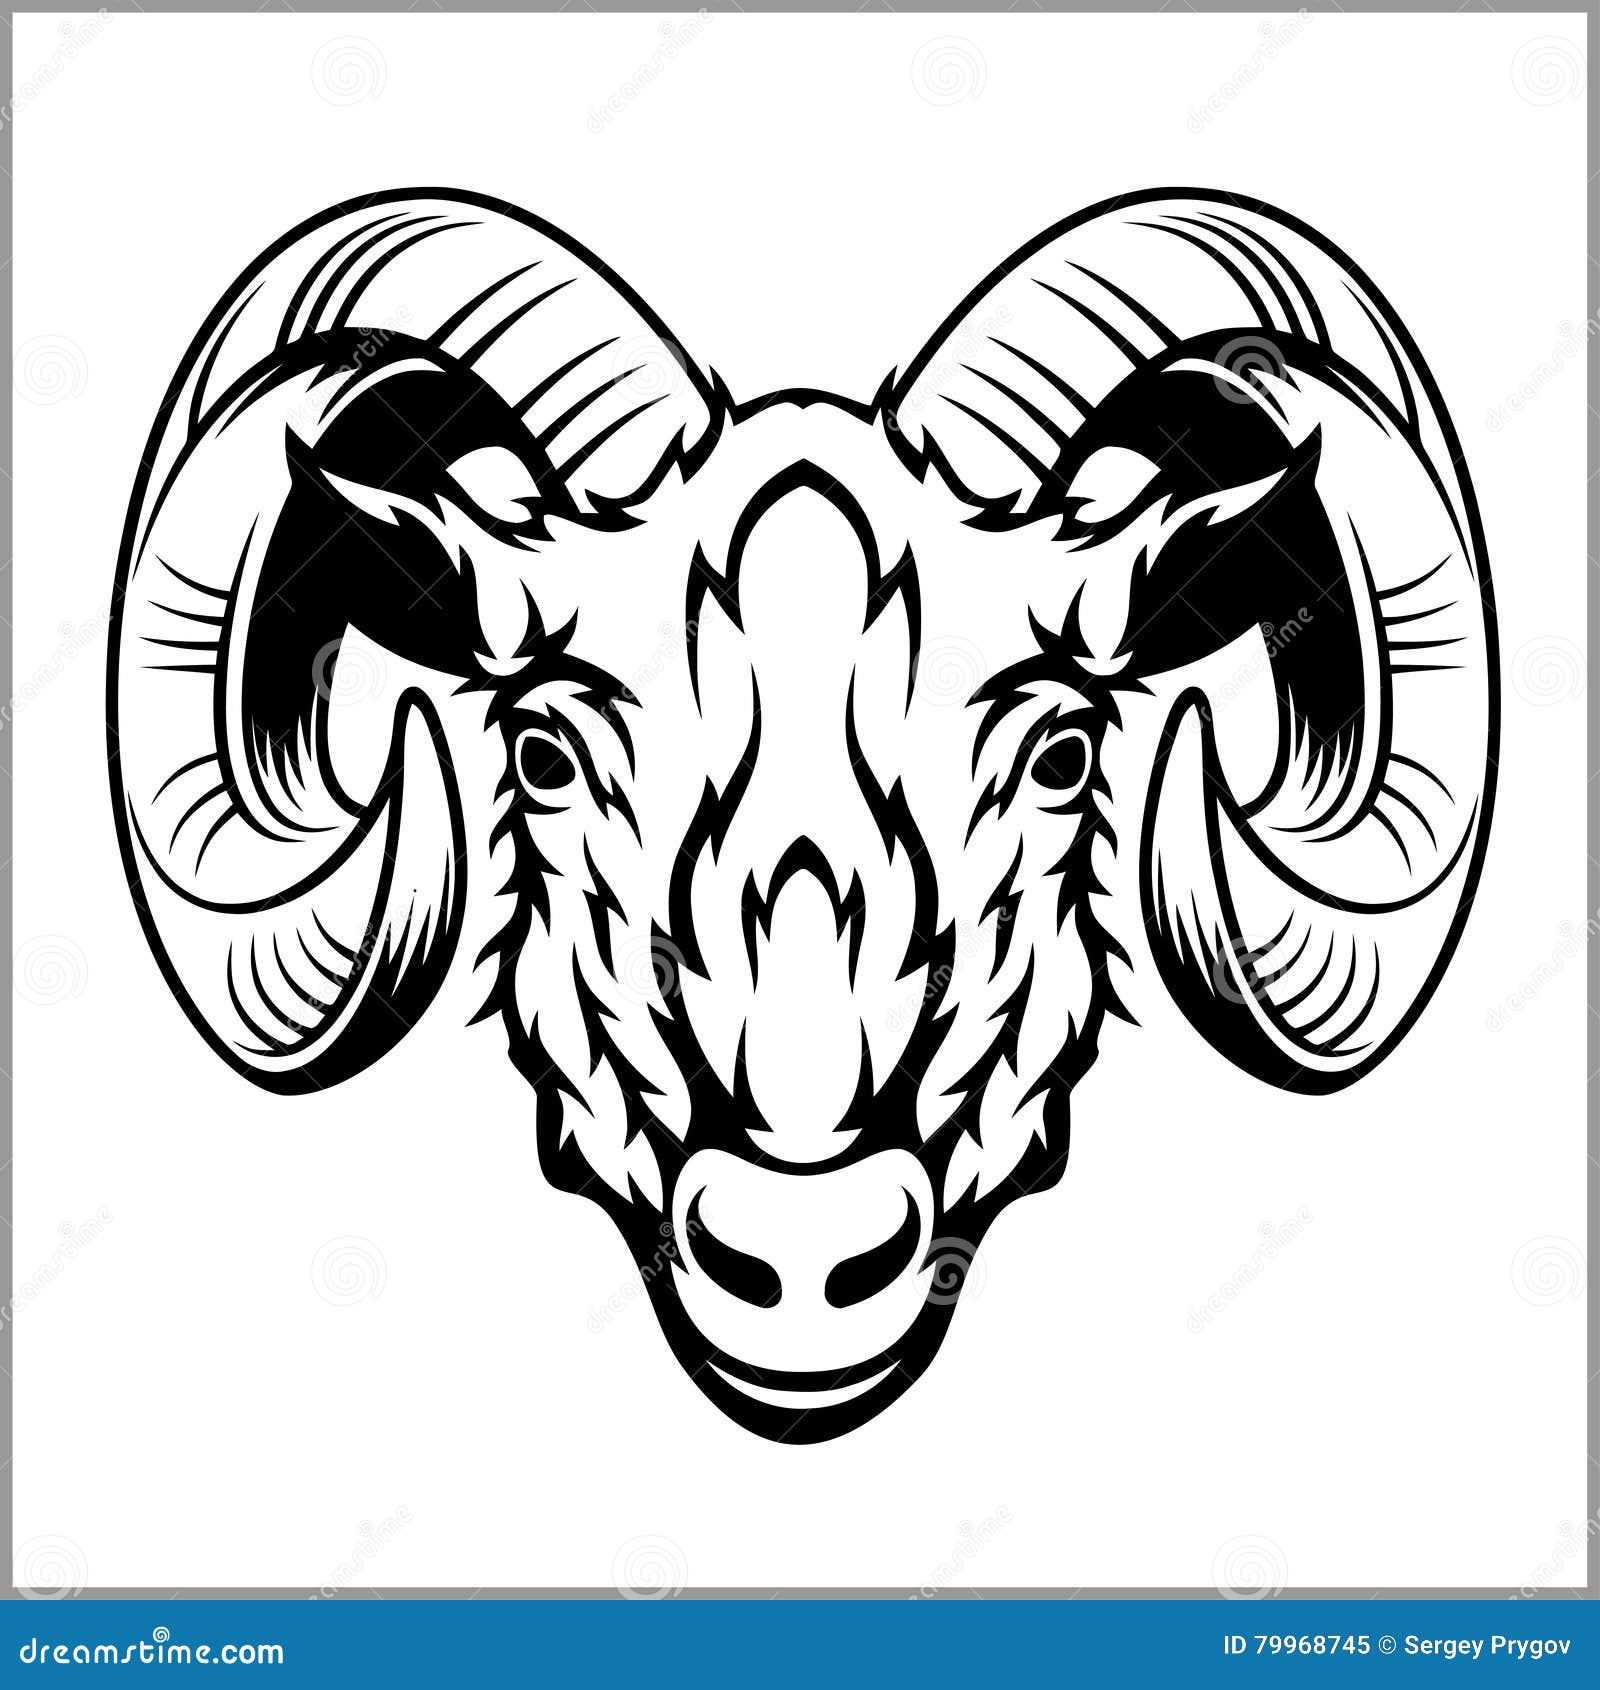 Download Ram Head Logo Or Icon In Black And White. Stock Vector - Illustration of bighorn, goat: 79968745